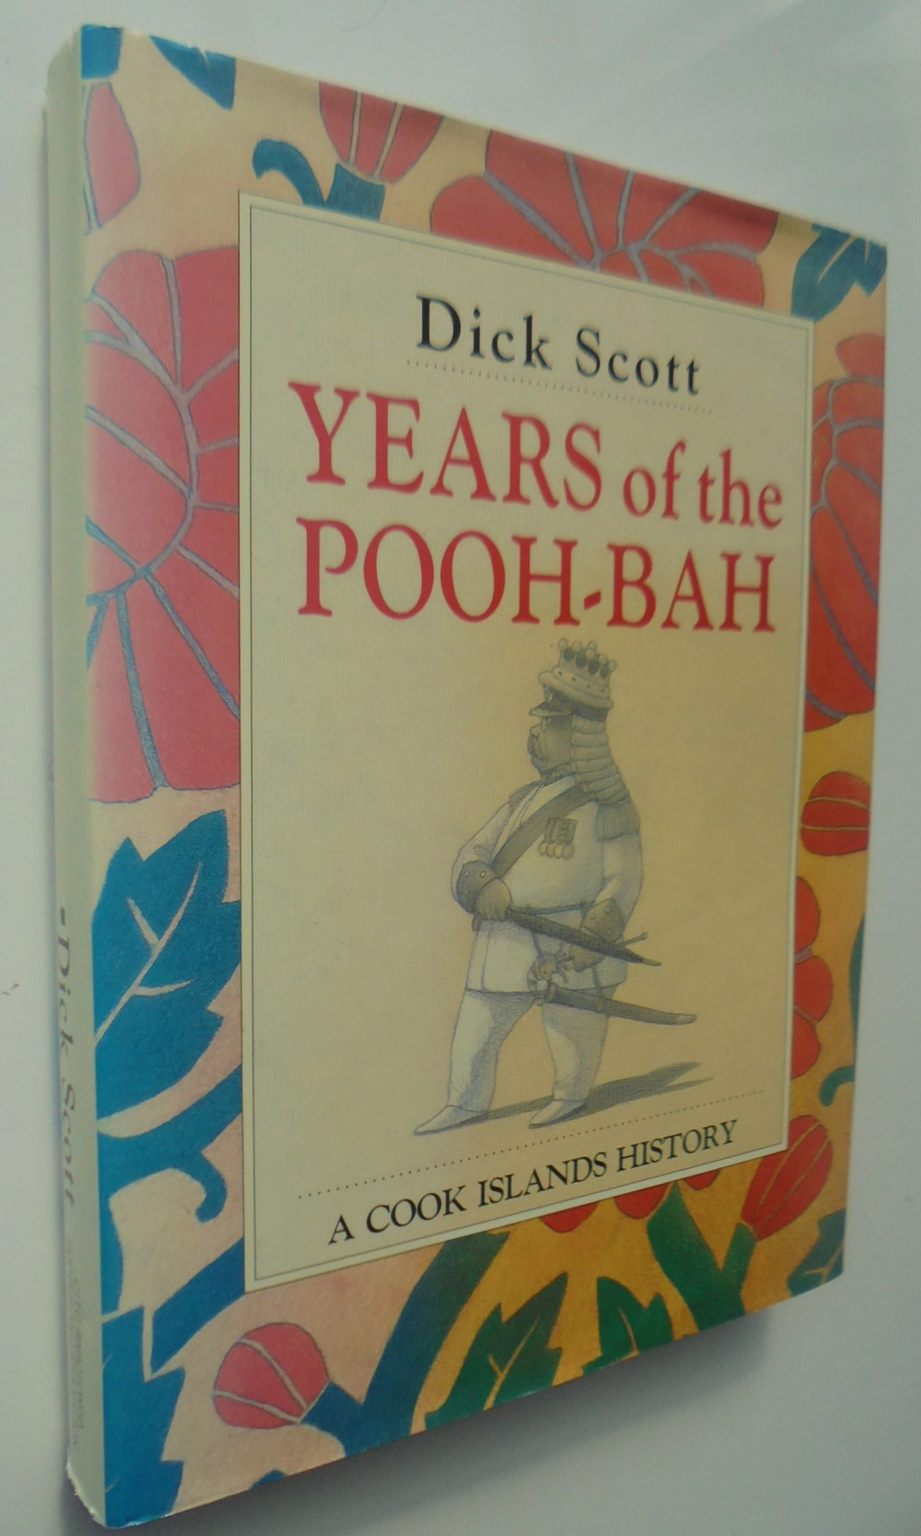 Years of the Pooh-Bah: A Cook Islands History BY Dick Scott. 1991, FIRST EDITION. SCARCE.